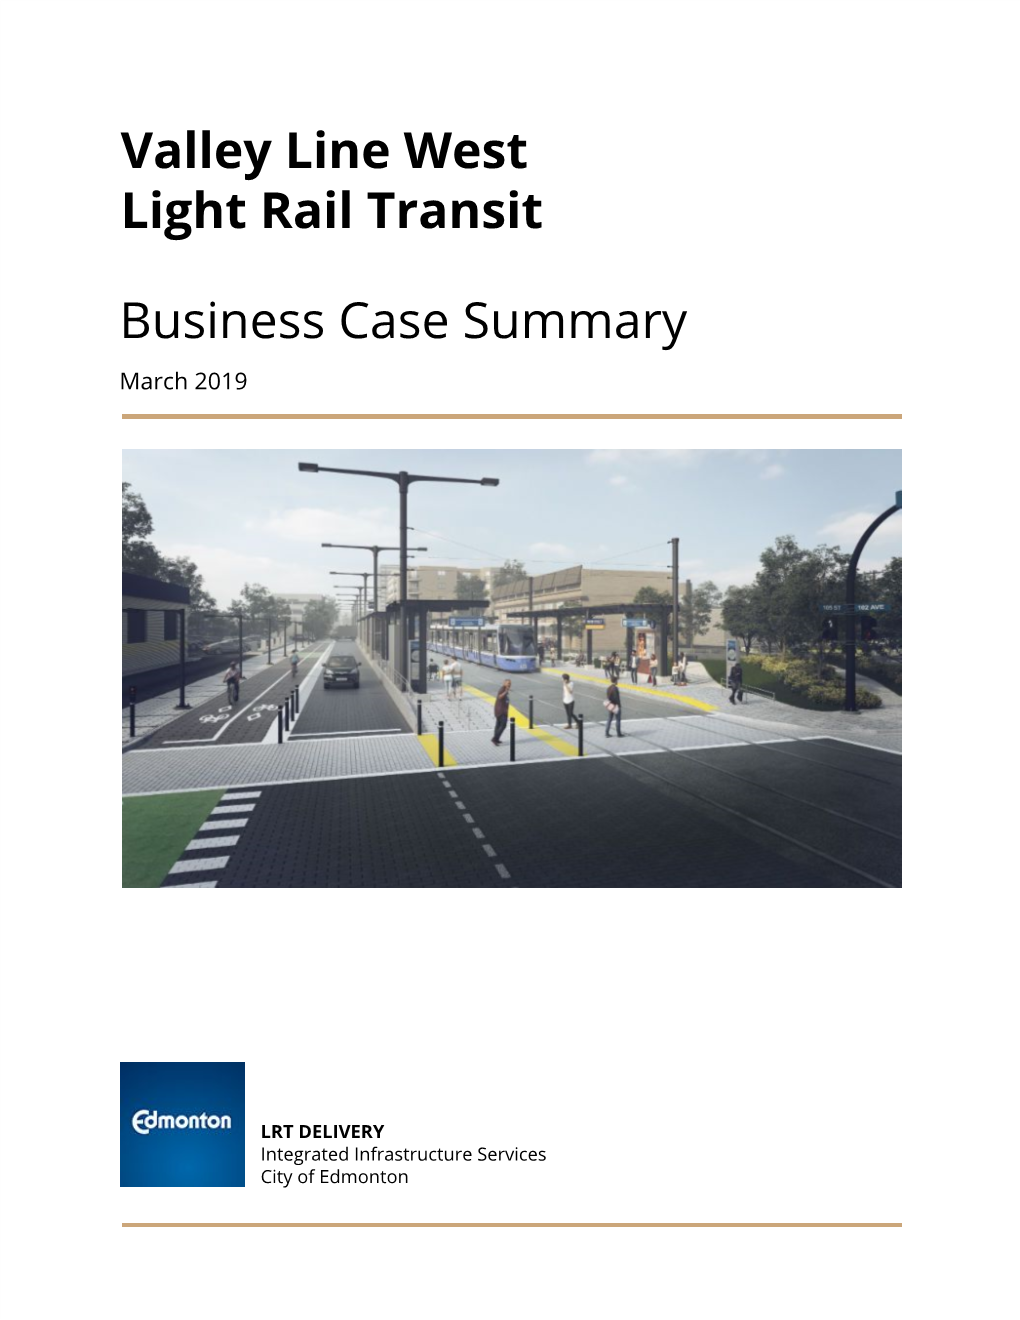 Valley Line West Business Case Summary